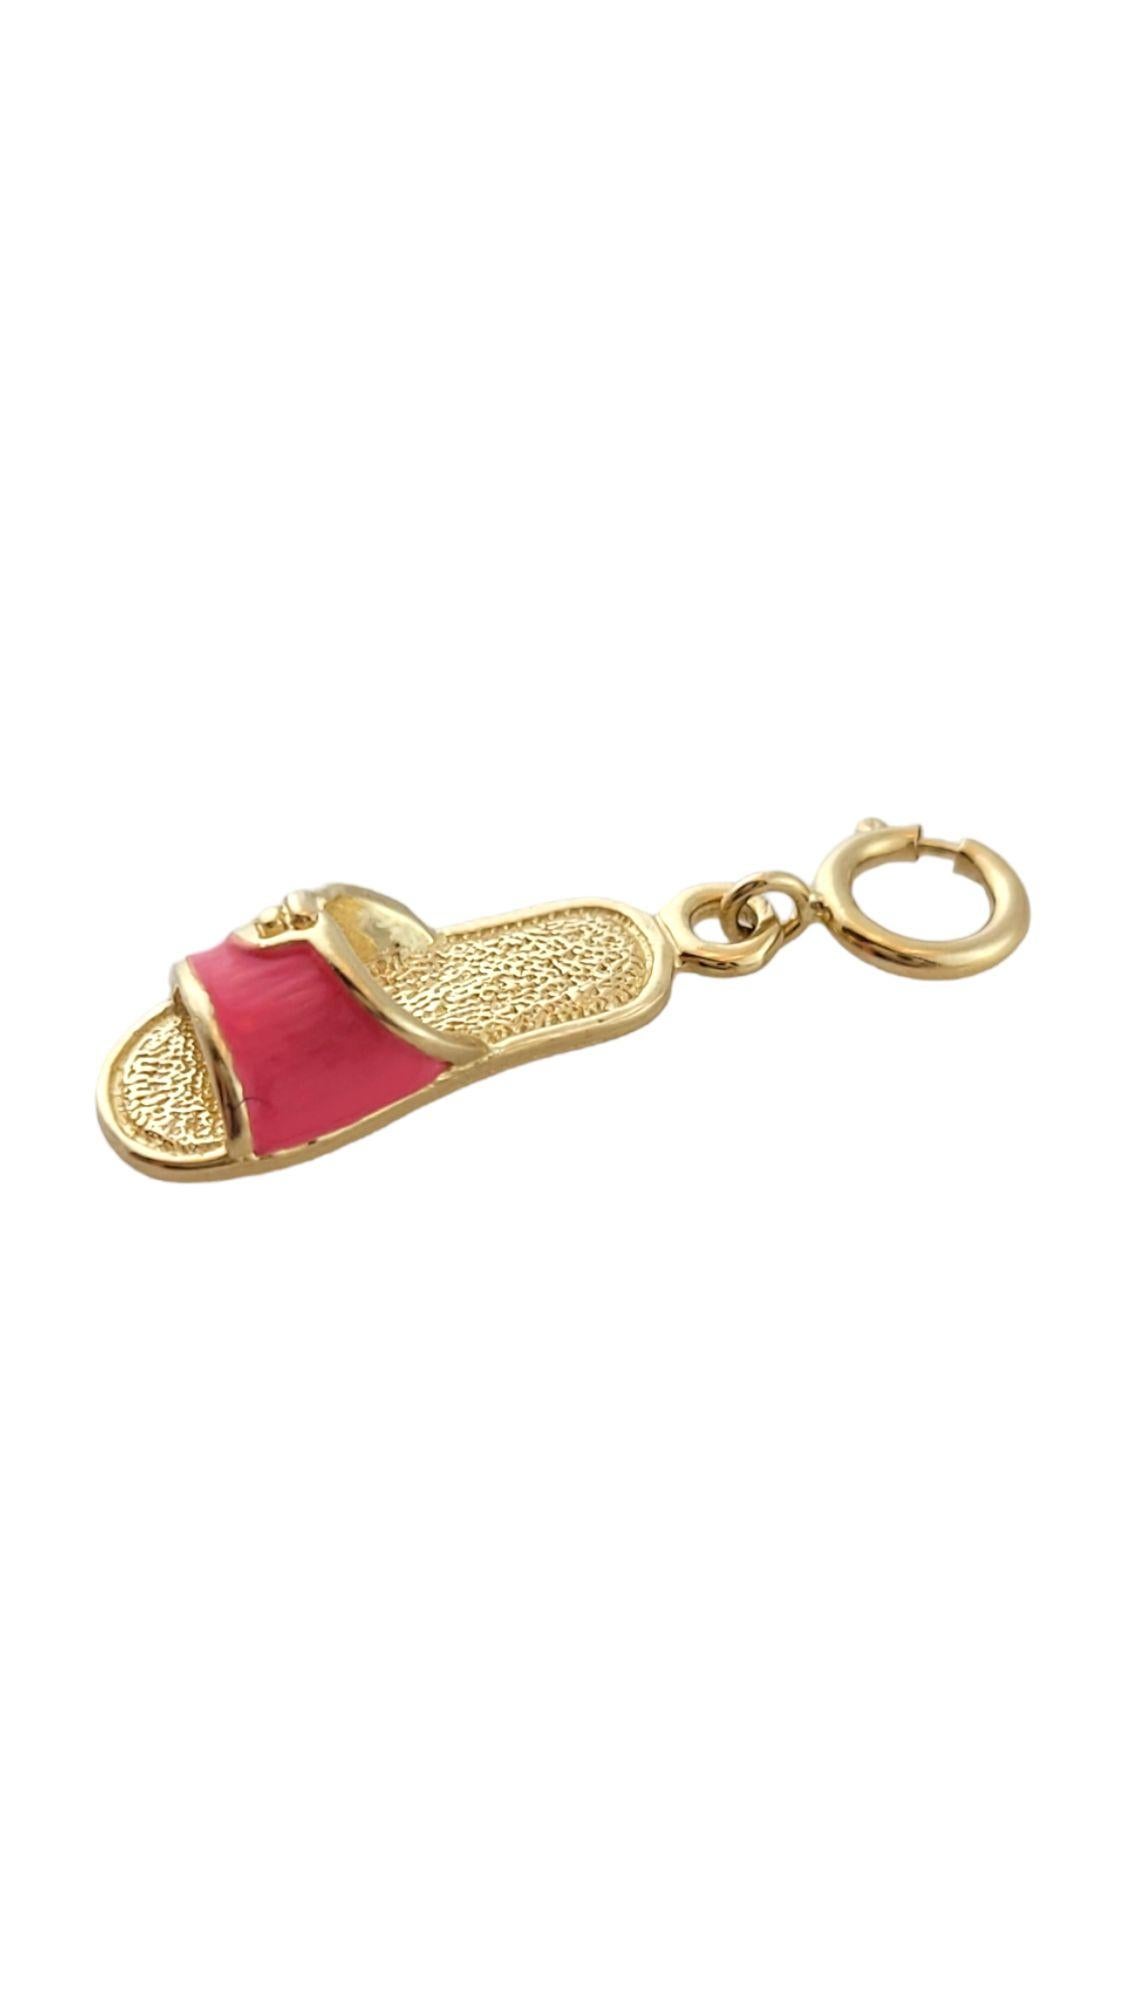 Vintage 14K Yellow Gold Beach Slide Charm

Take a trip to the beach with this adorable pink enamel beach slide charm!

Size: 18.6 mm X 7.1 mm

Weight: 1.5 g/1.0 dwt

Hallmark: 14K OD

Very good condition, professionally polished.

Will come packaged